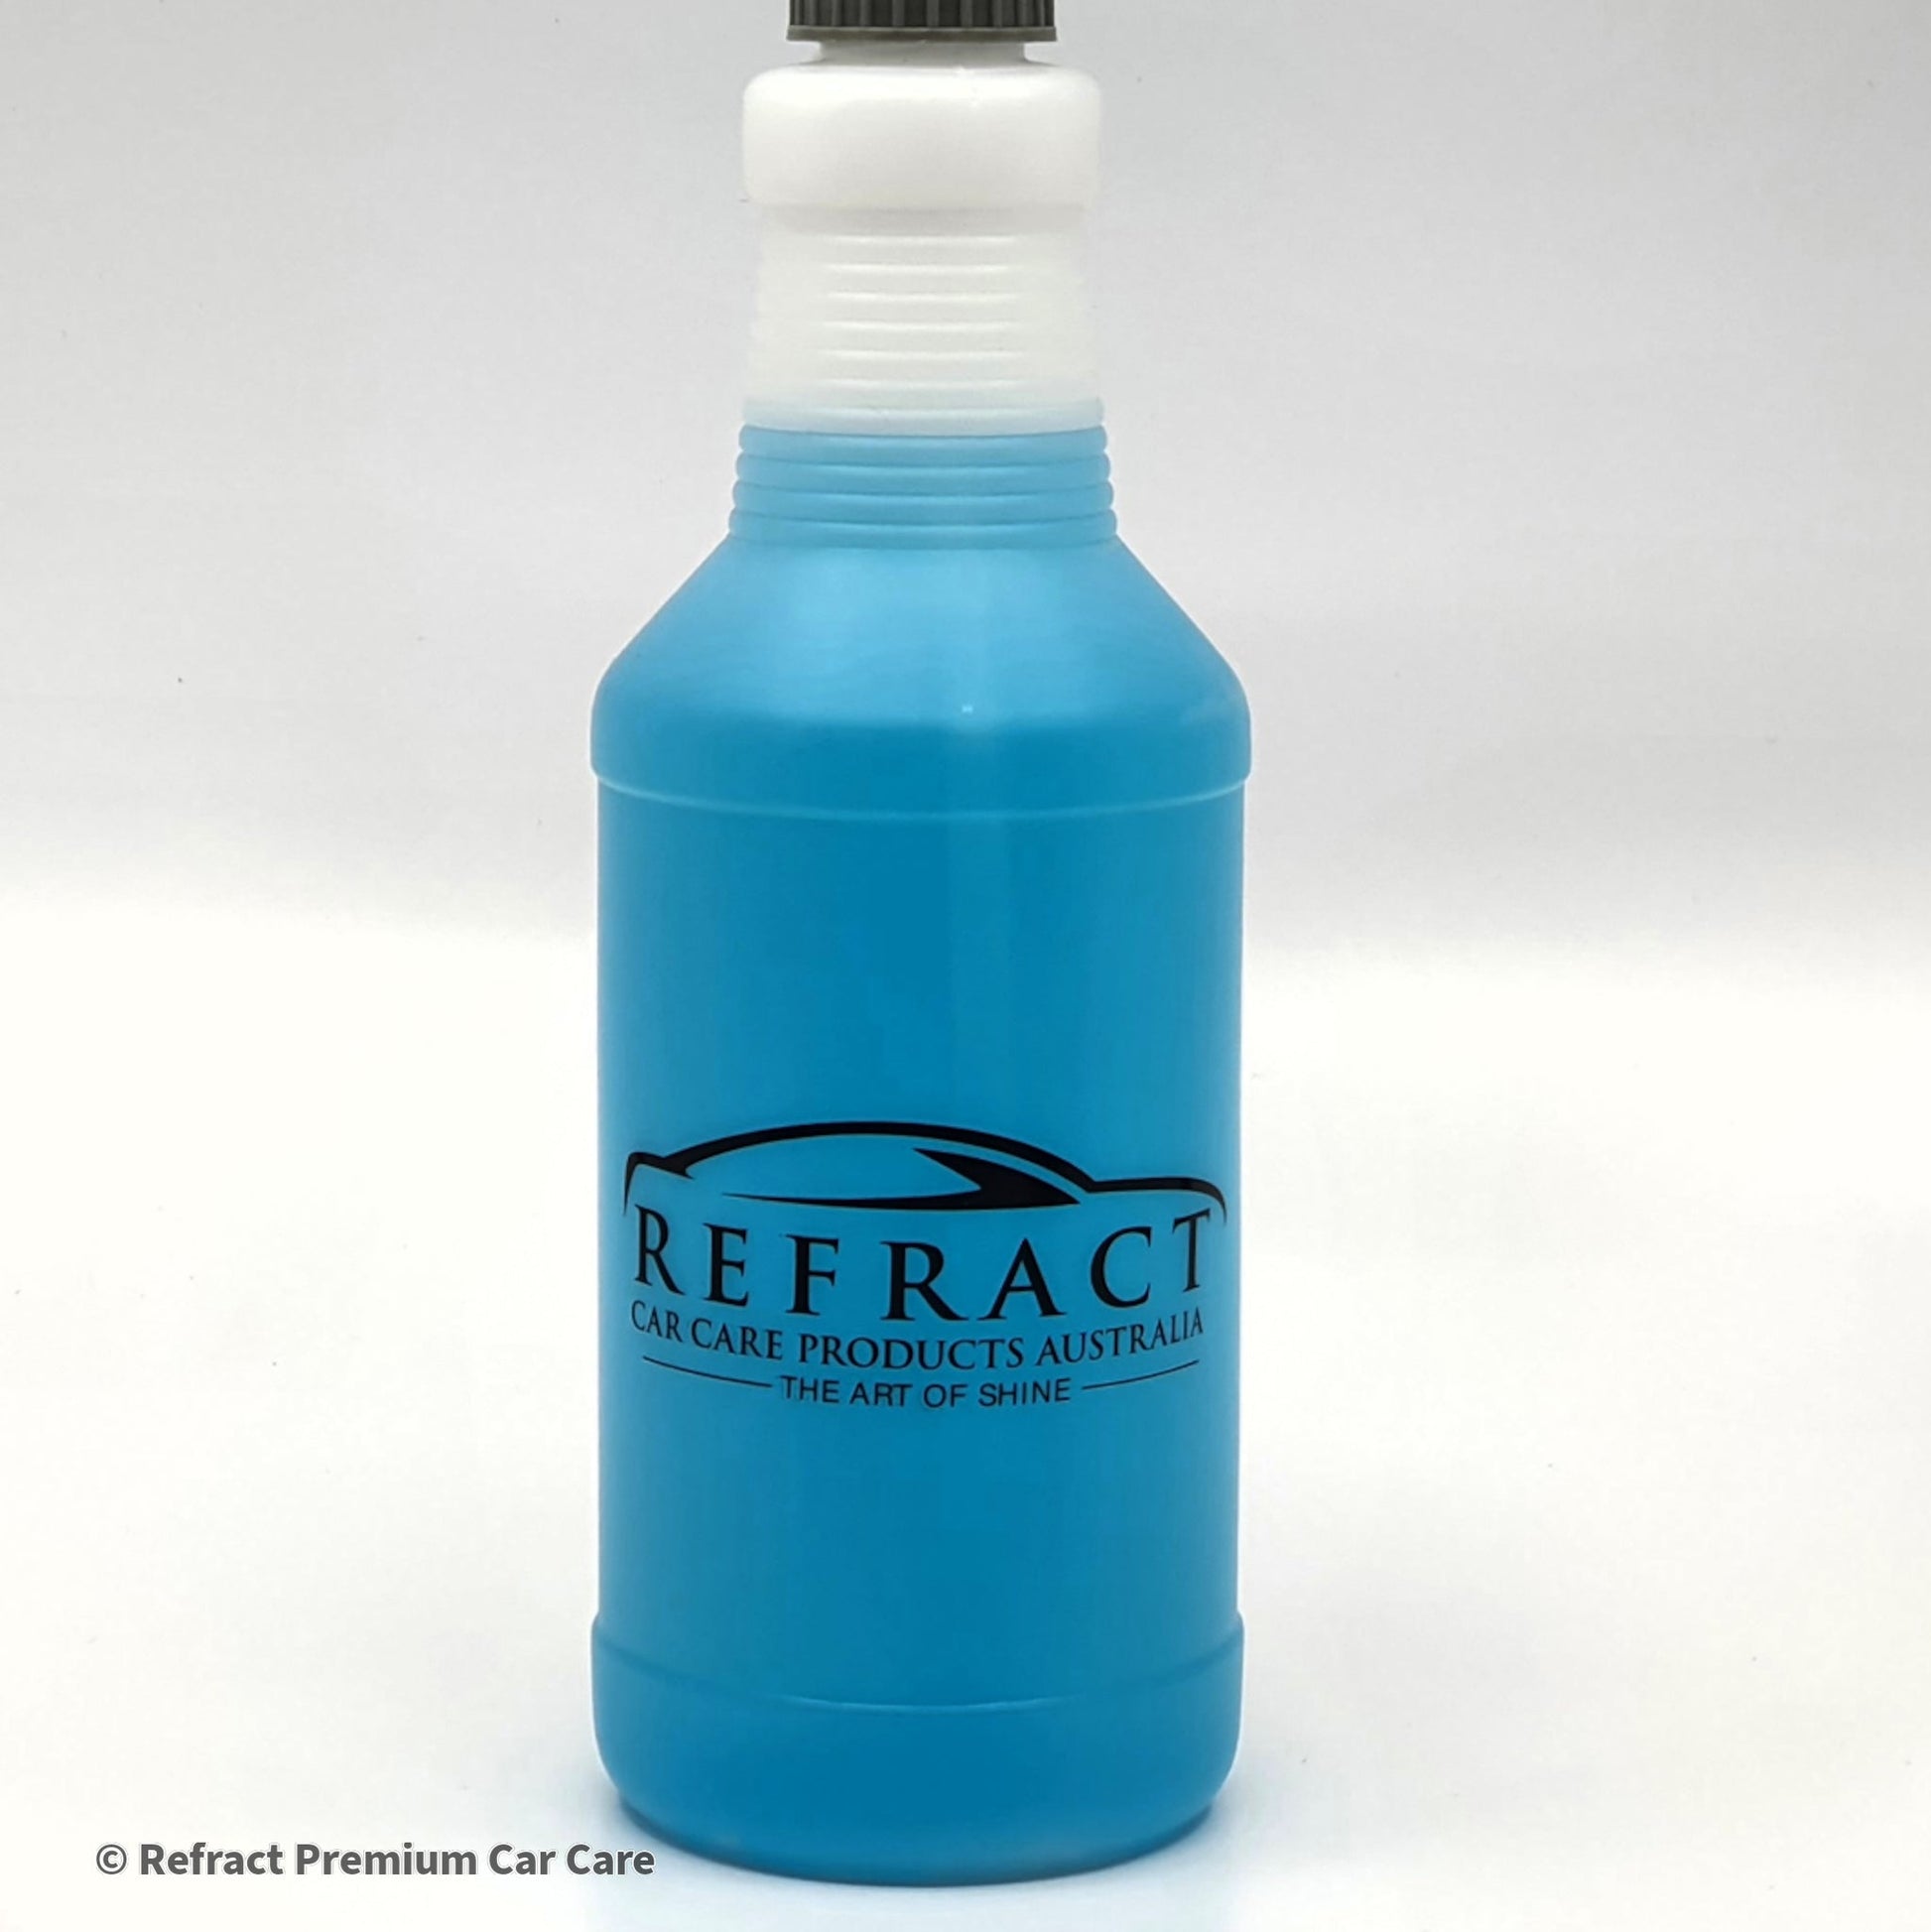 Refract Premium Car Care Products Refract Finger Clay Pad - International Professional Detailing Award Winning - Includes 2 Clay Lubricant Dissolving Tablets $34.95